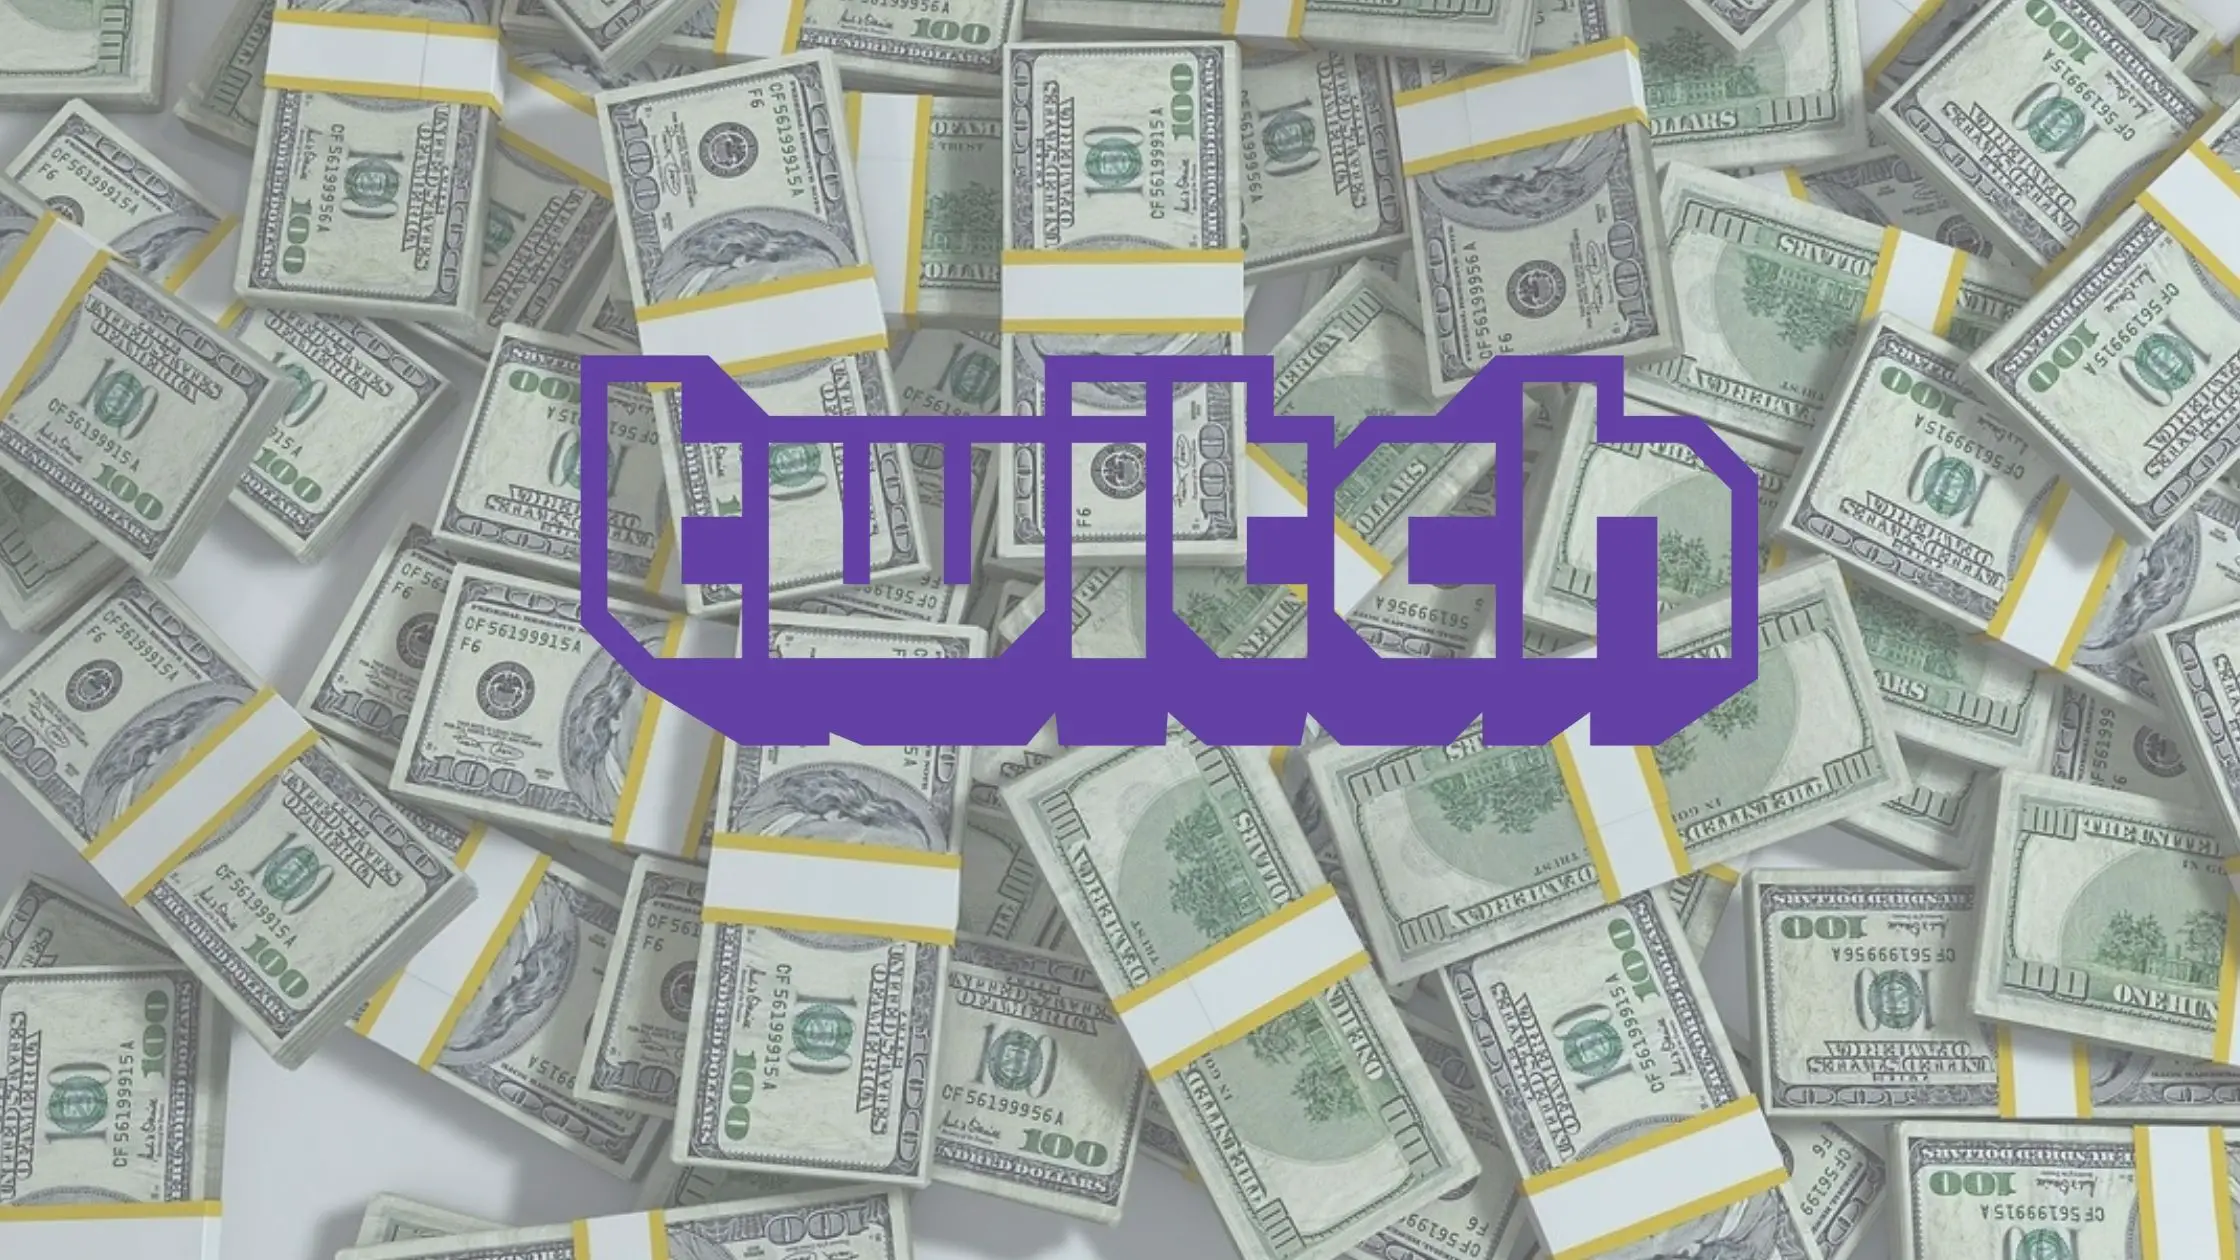 twitch-is-cutting-payments-of-big-streamers-says-washington-post-report